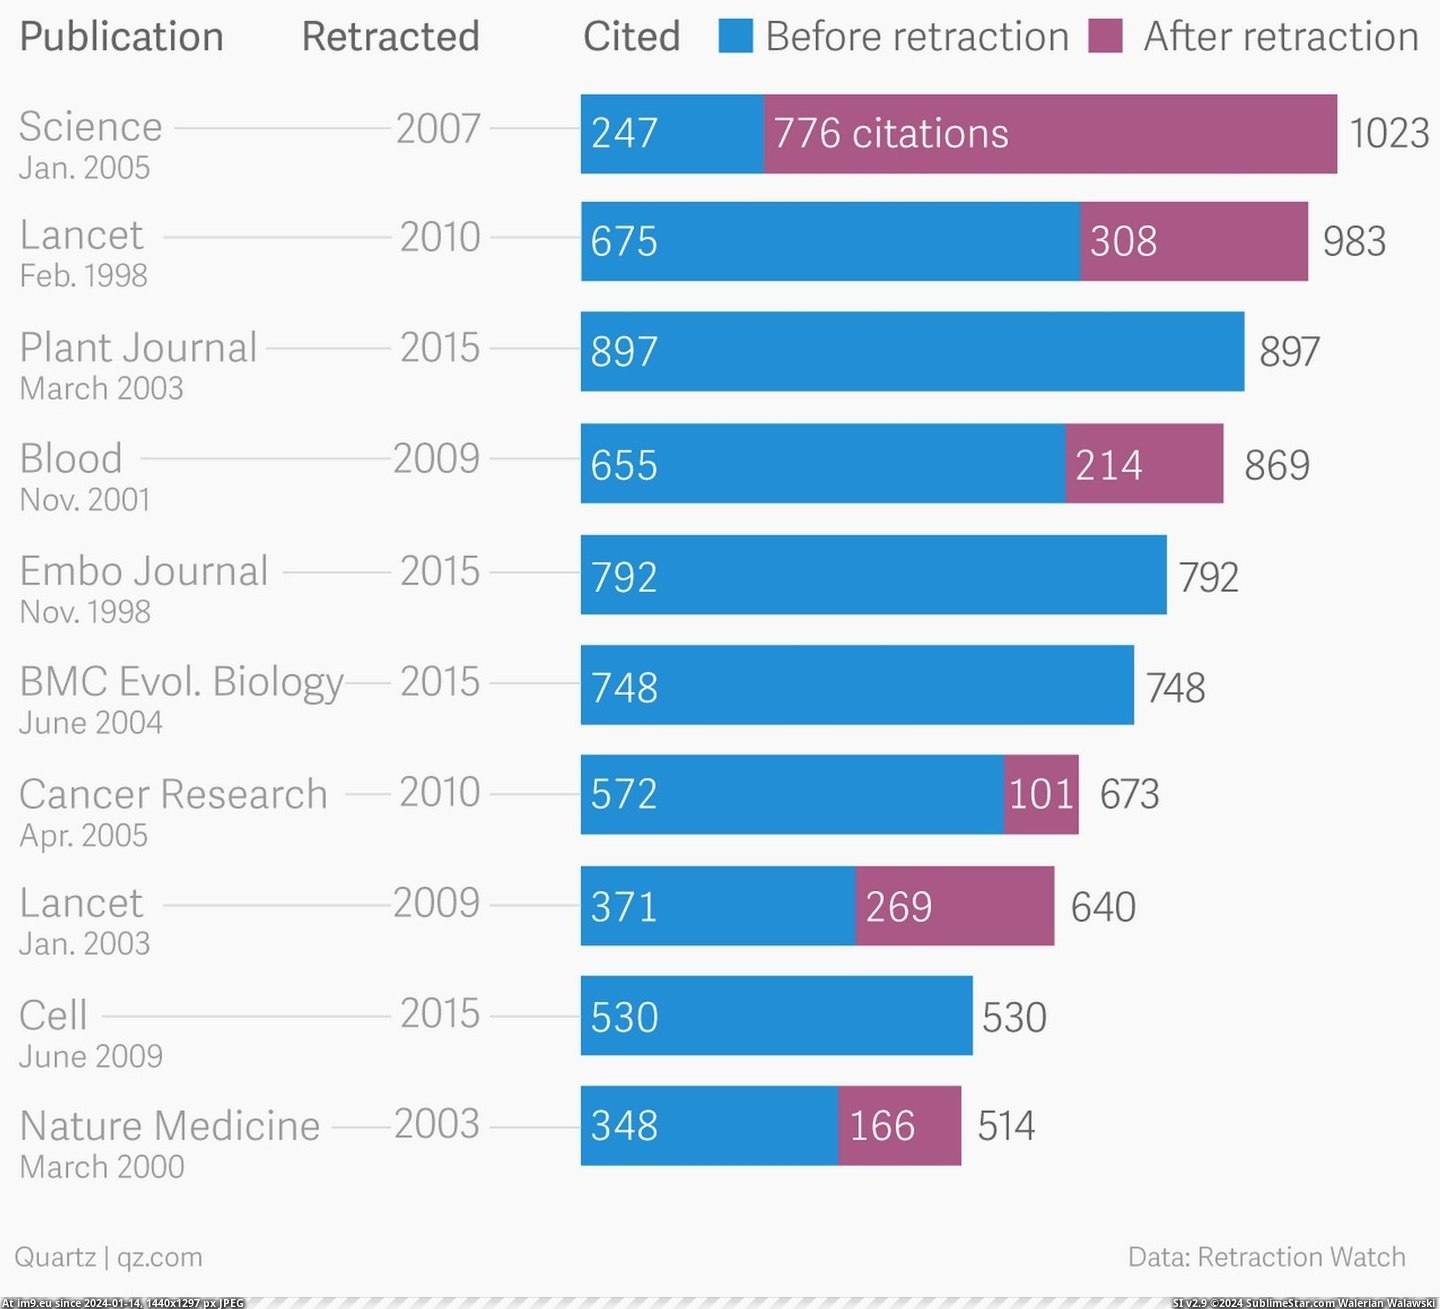 [Dataisbeautiful] Researchers keep citing retracted papers (in My r/DATAISBEAUTIFUL favs)